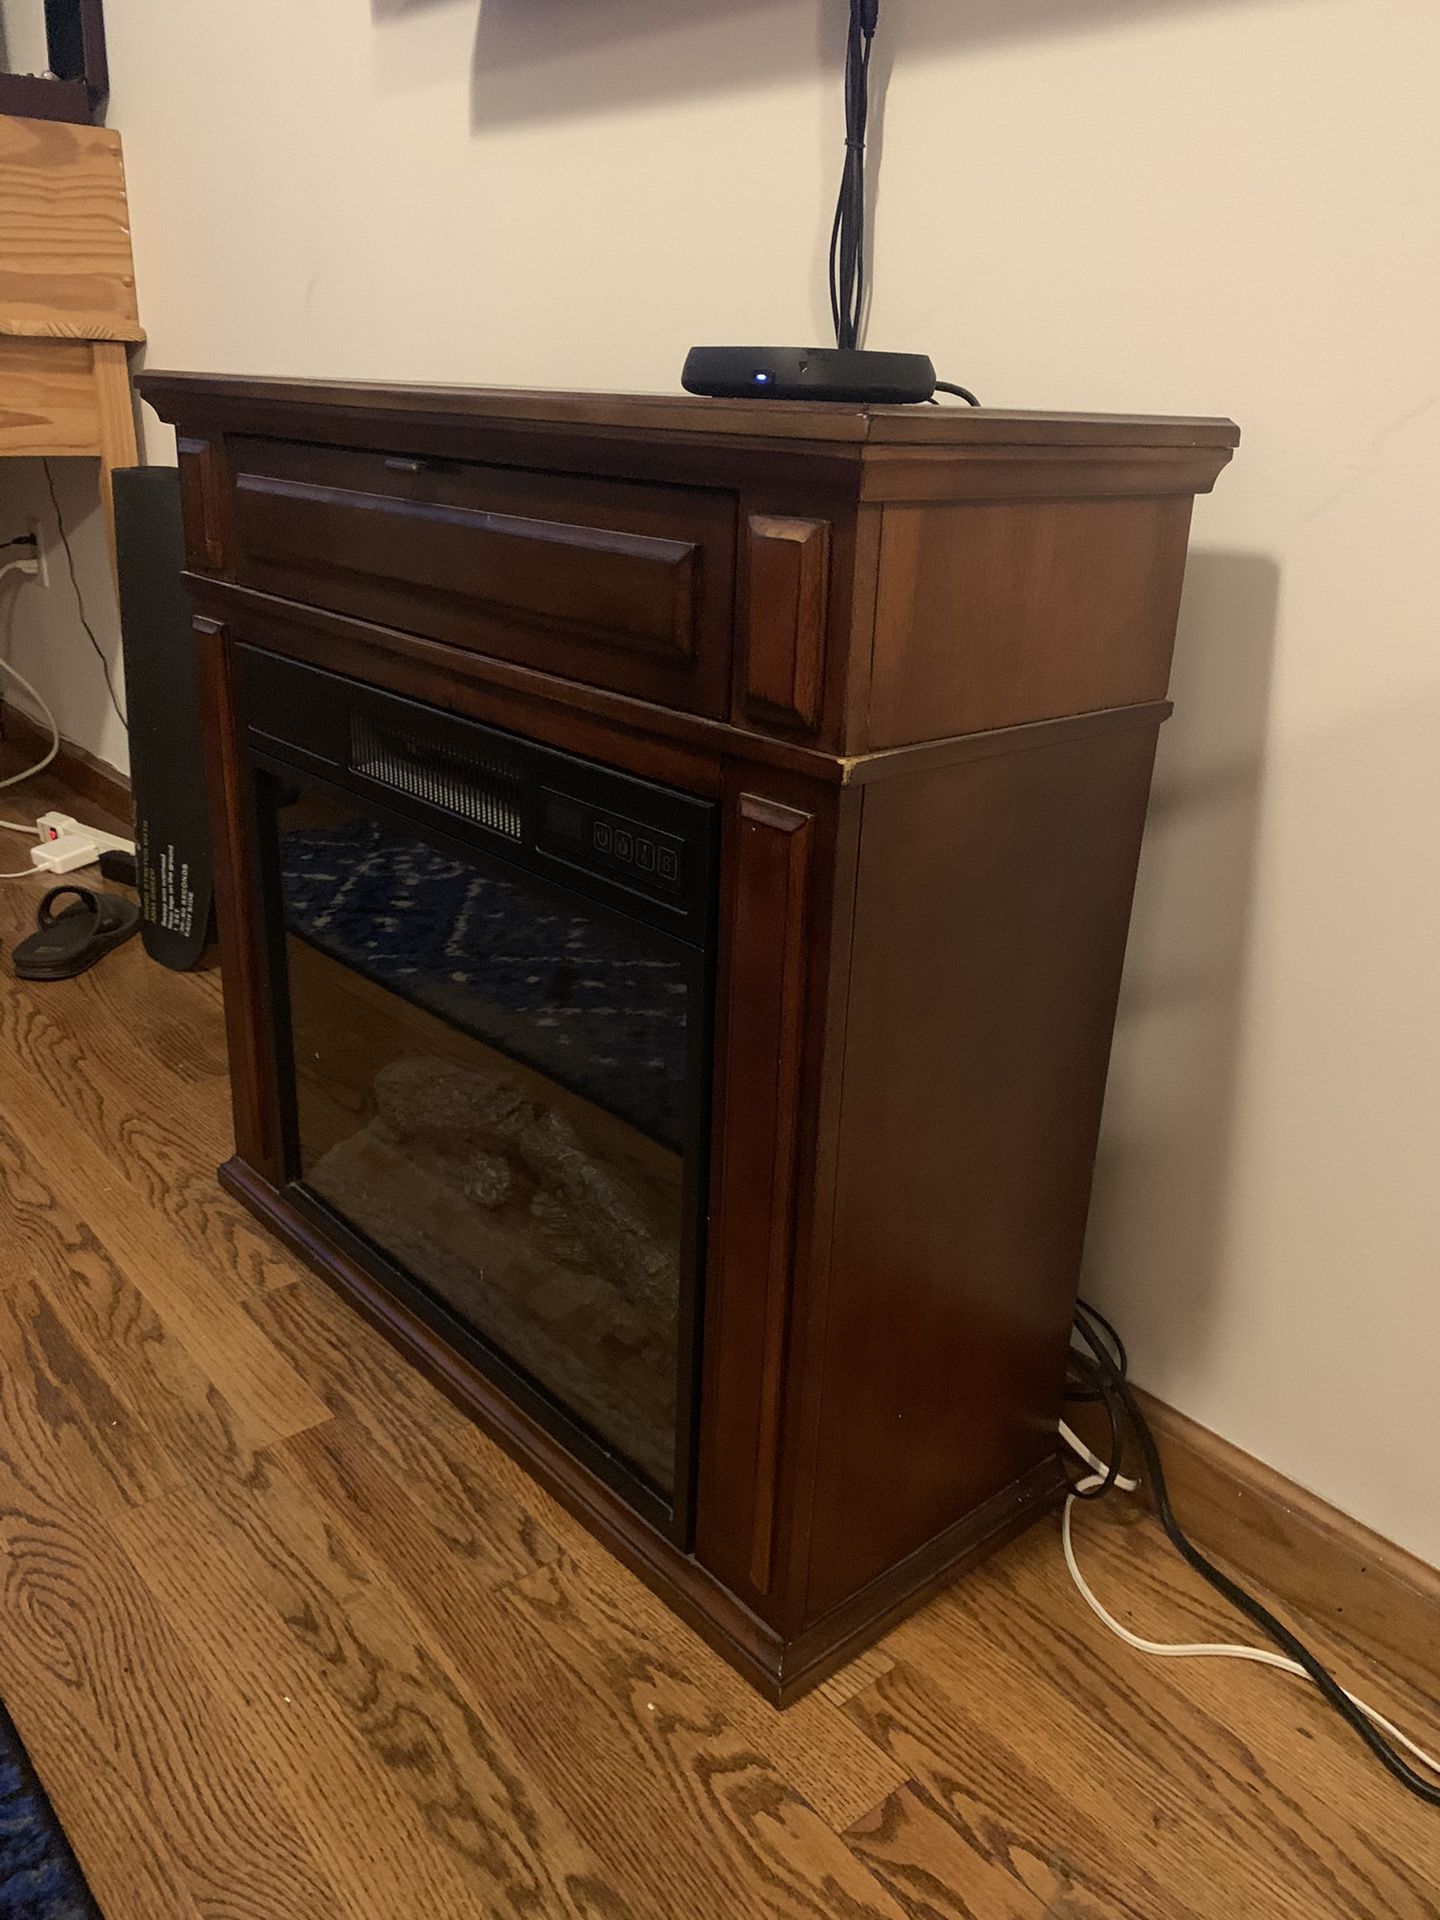 Electric Fireplace And Space Heater 